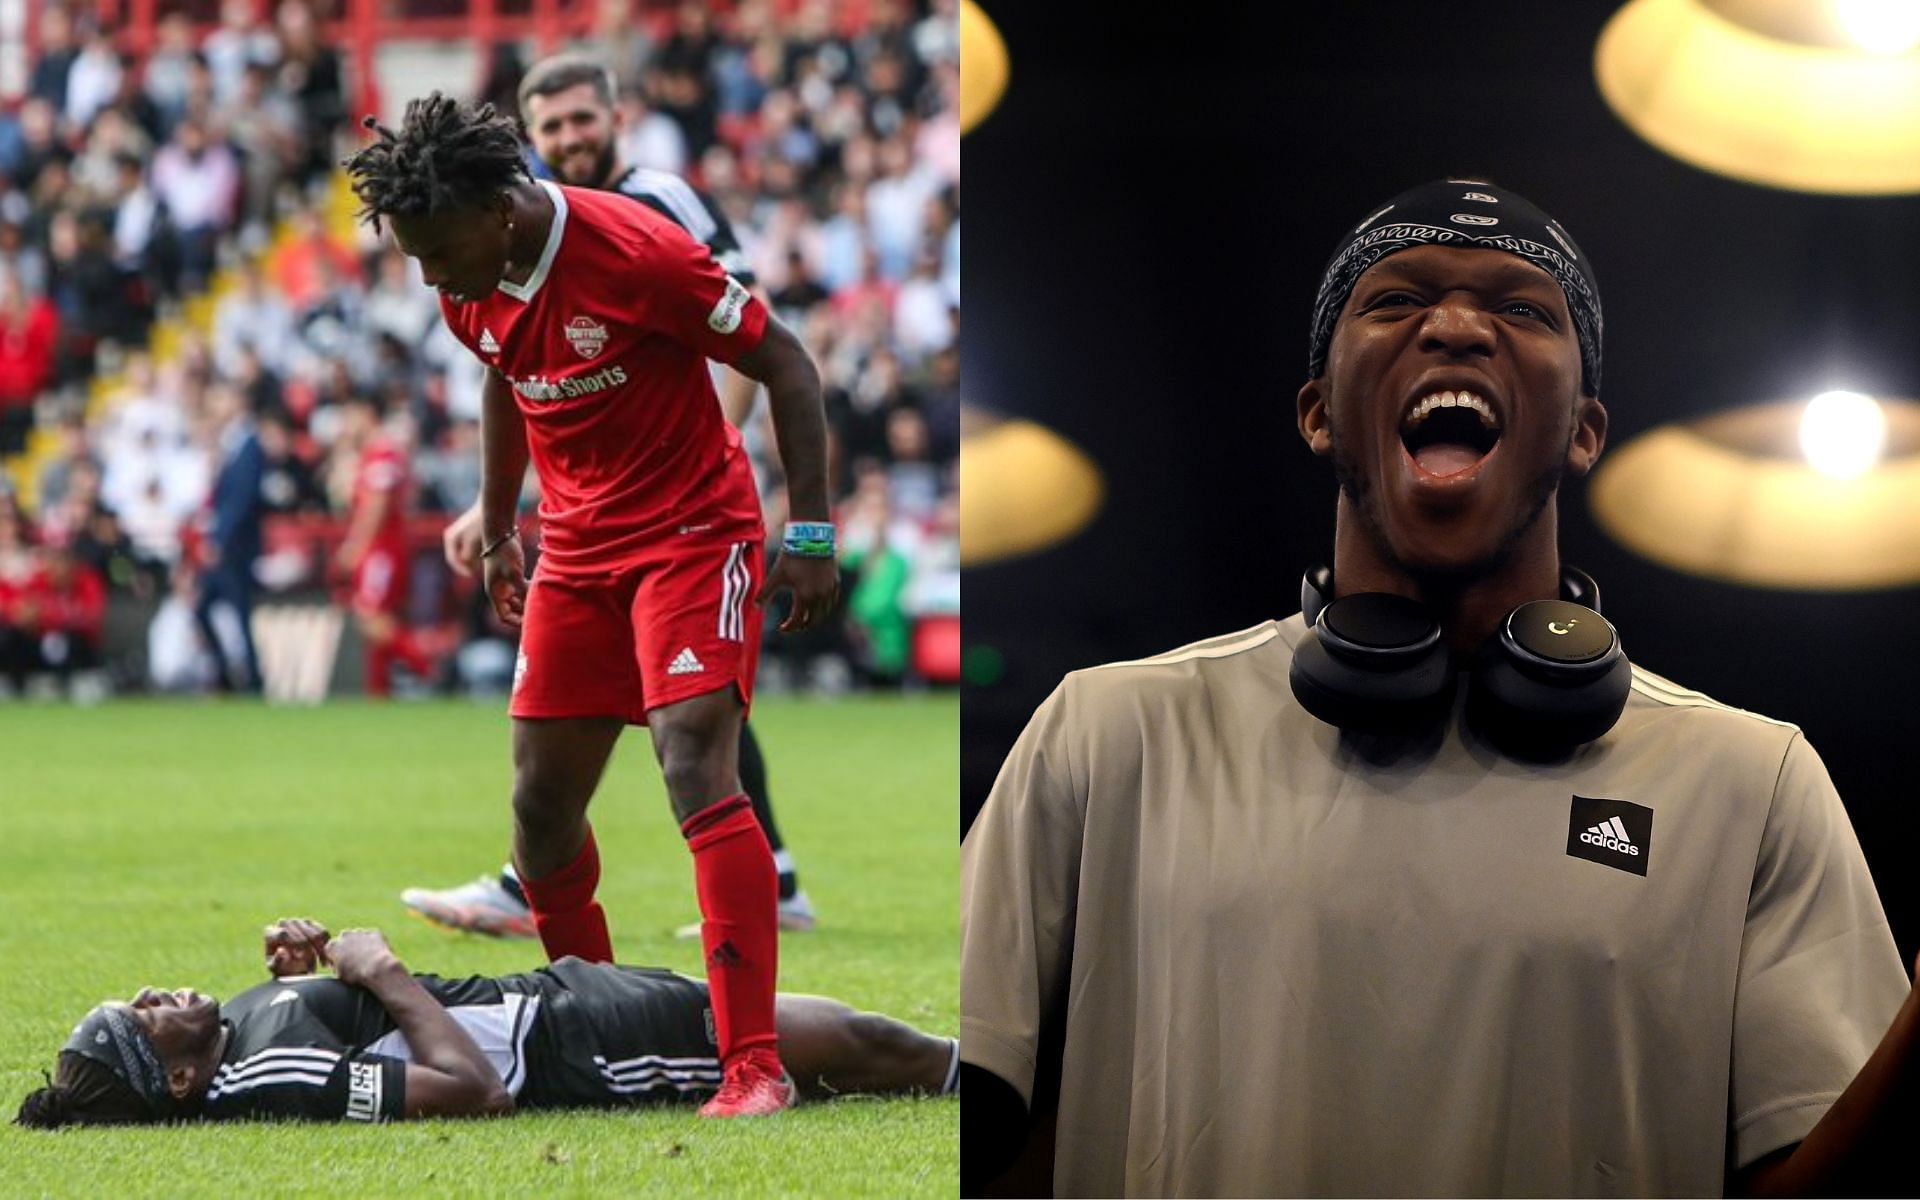 IShowSpeed standing over KSI at the Sidemen Charity Match (left) and KSI (right) (Image credits Getty Images and @SpeedUpdates1 on Twitter)